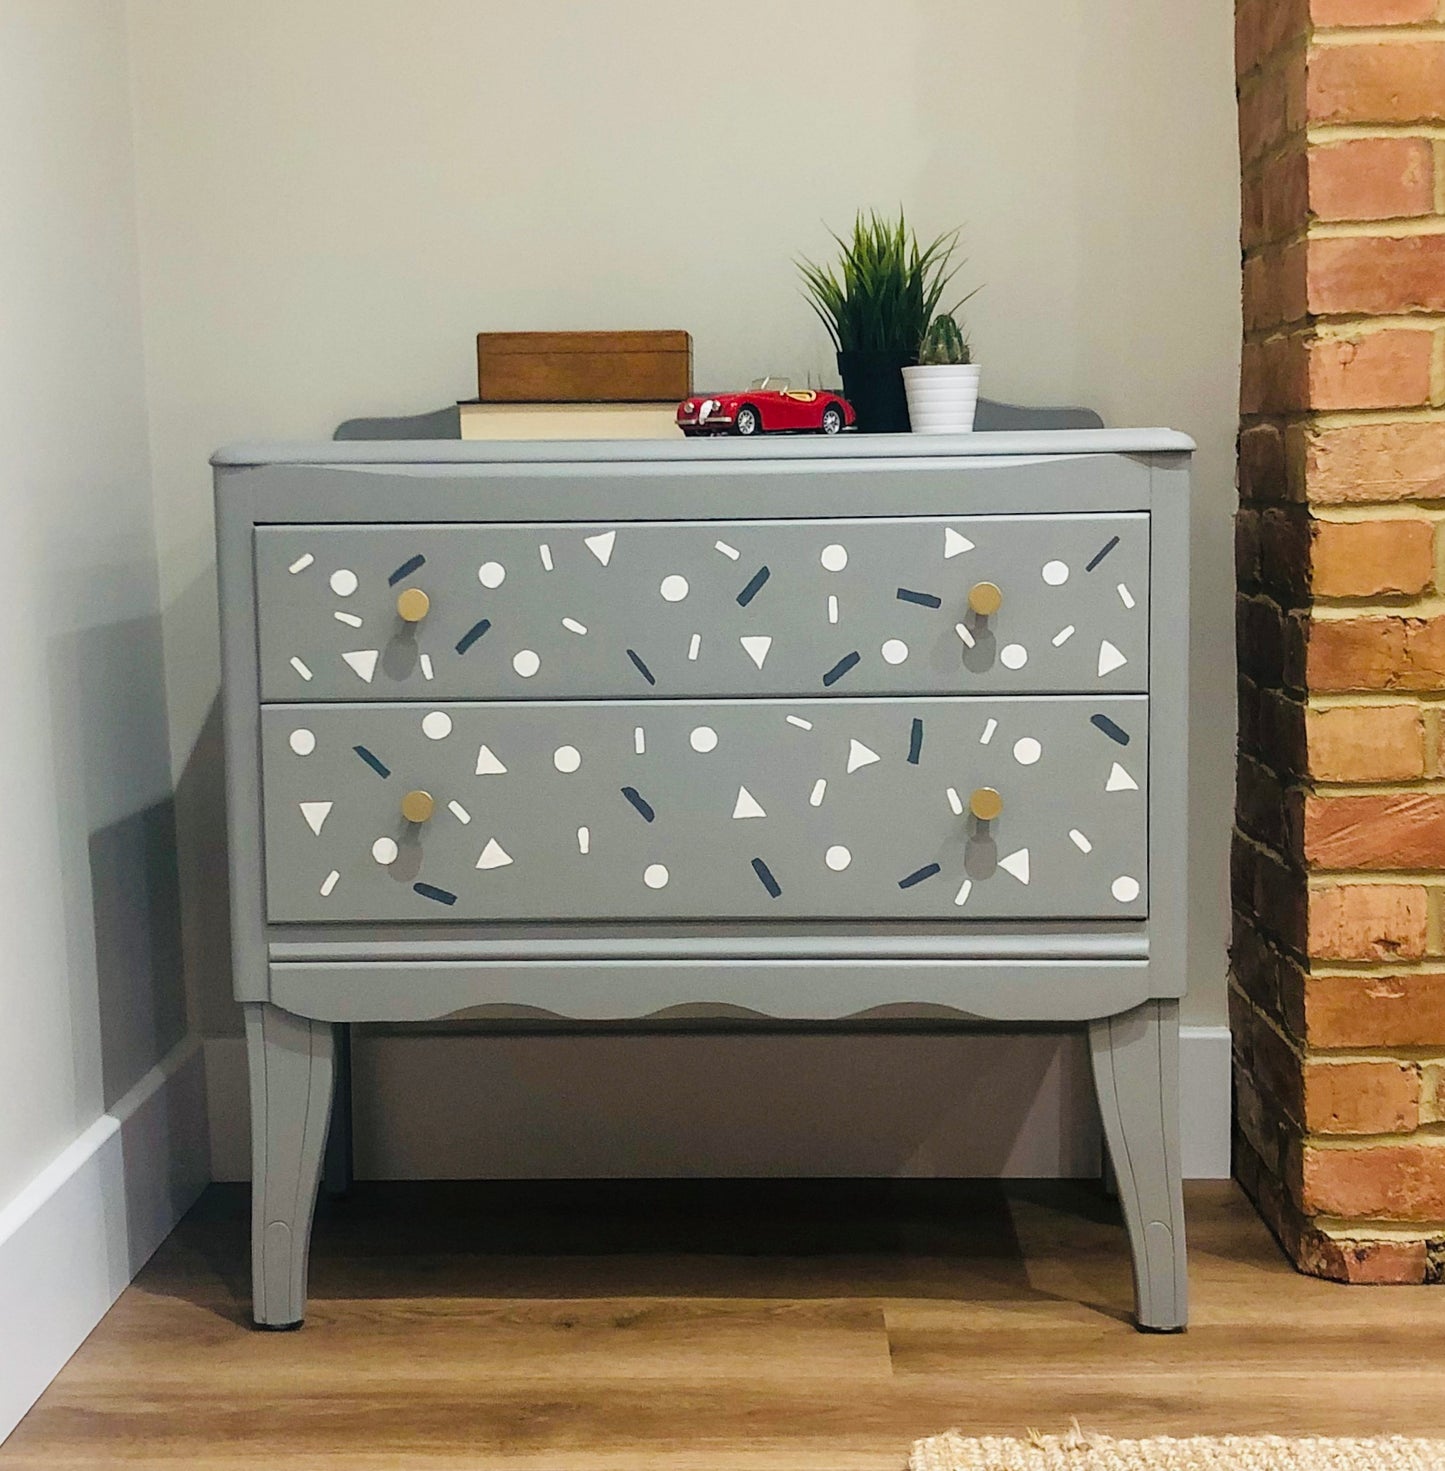 Small Harris Lebus chest of drawers in grey with small shapes painted on the drawers